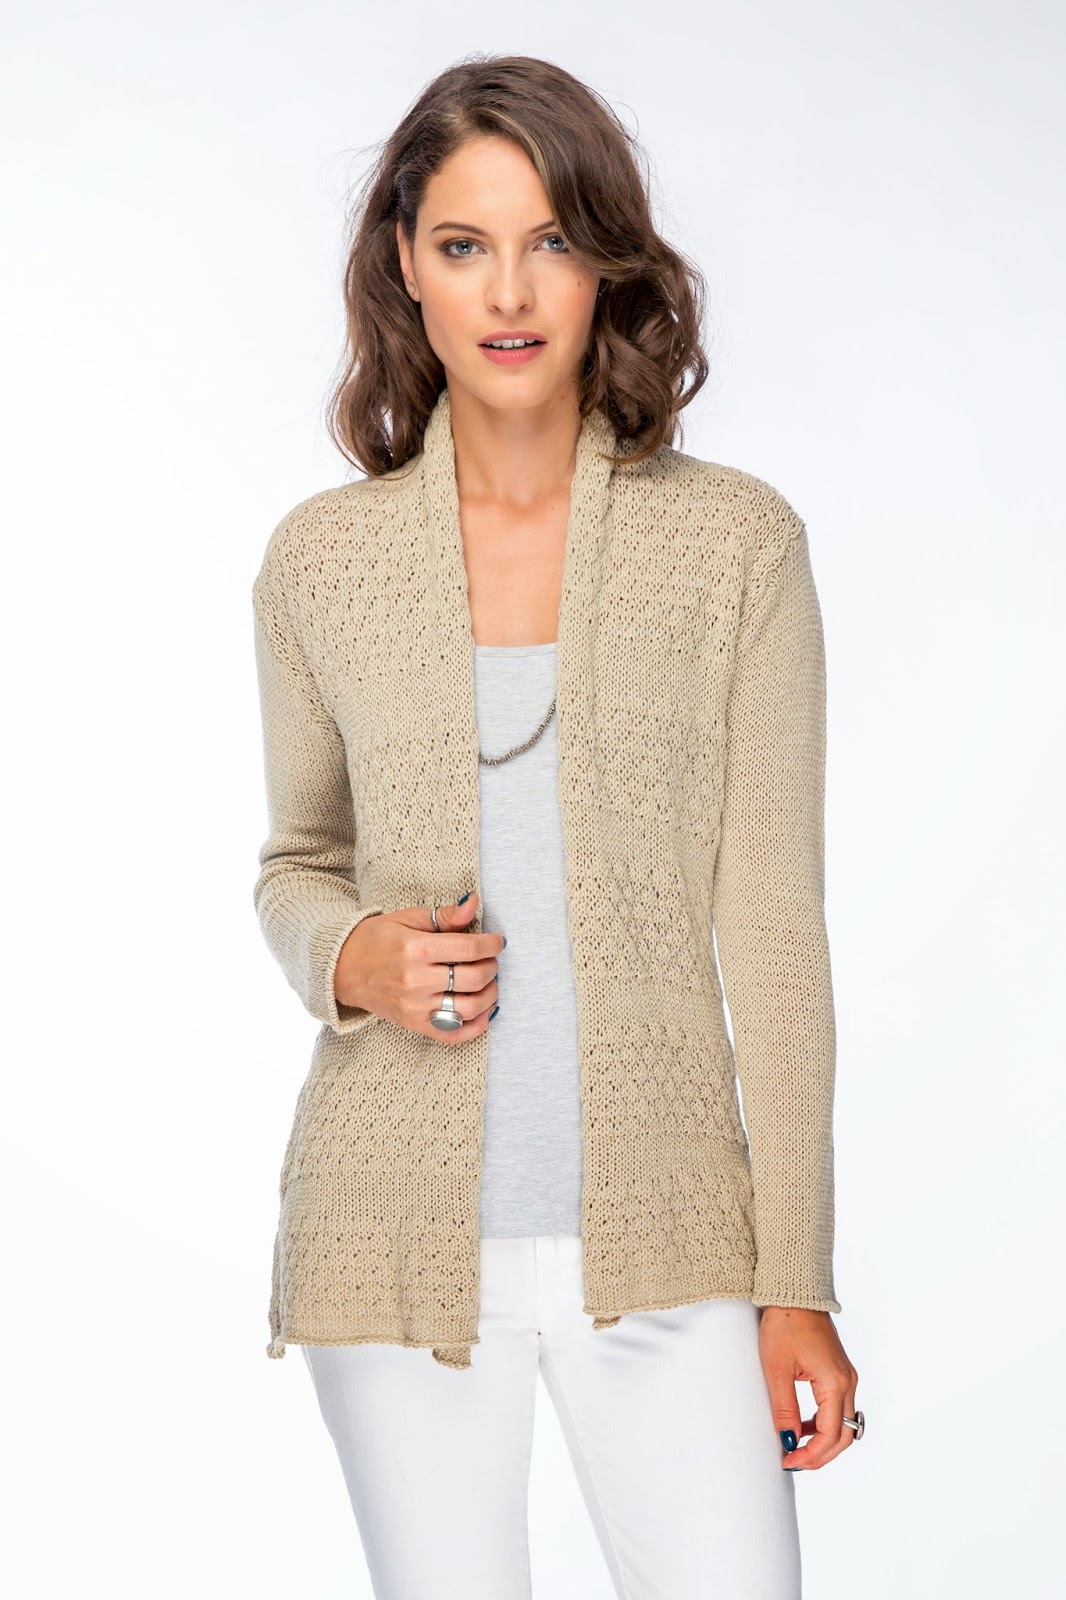 Fashion Scoop: The perfect versatile cardy!